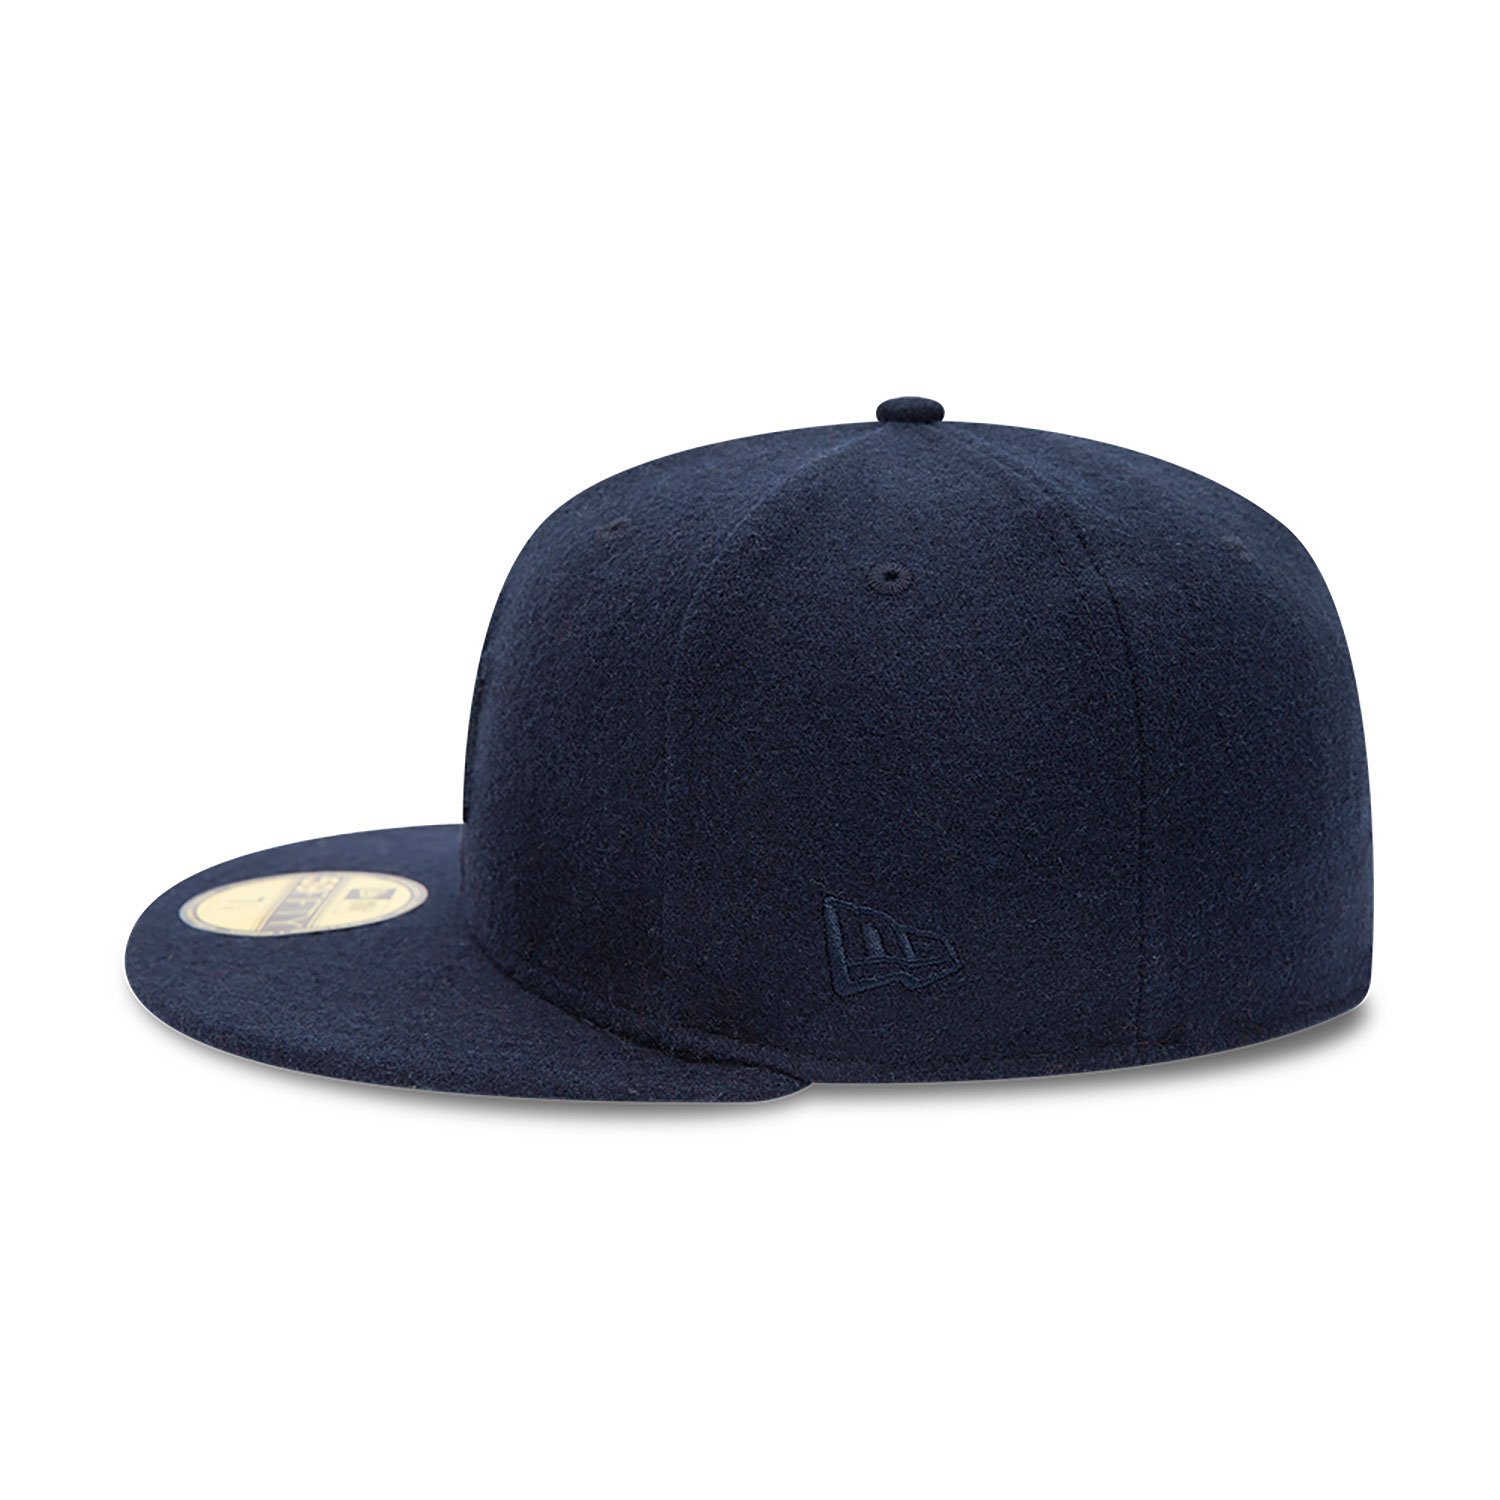 New York Yankees Melton Navy 59FIFTY Fitted Cap